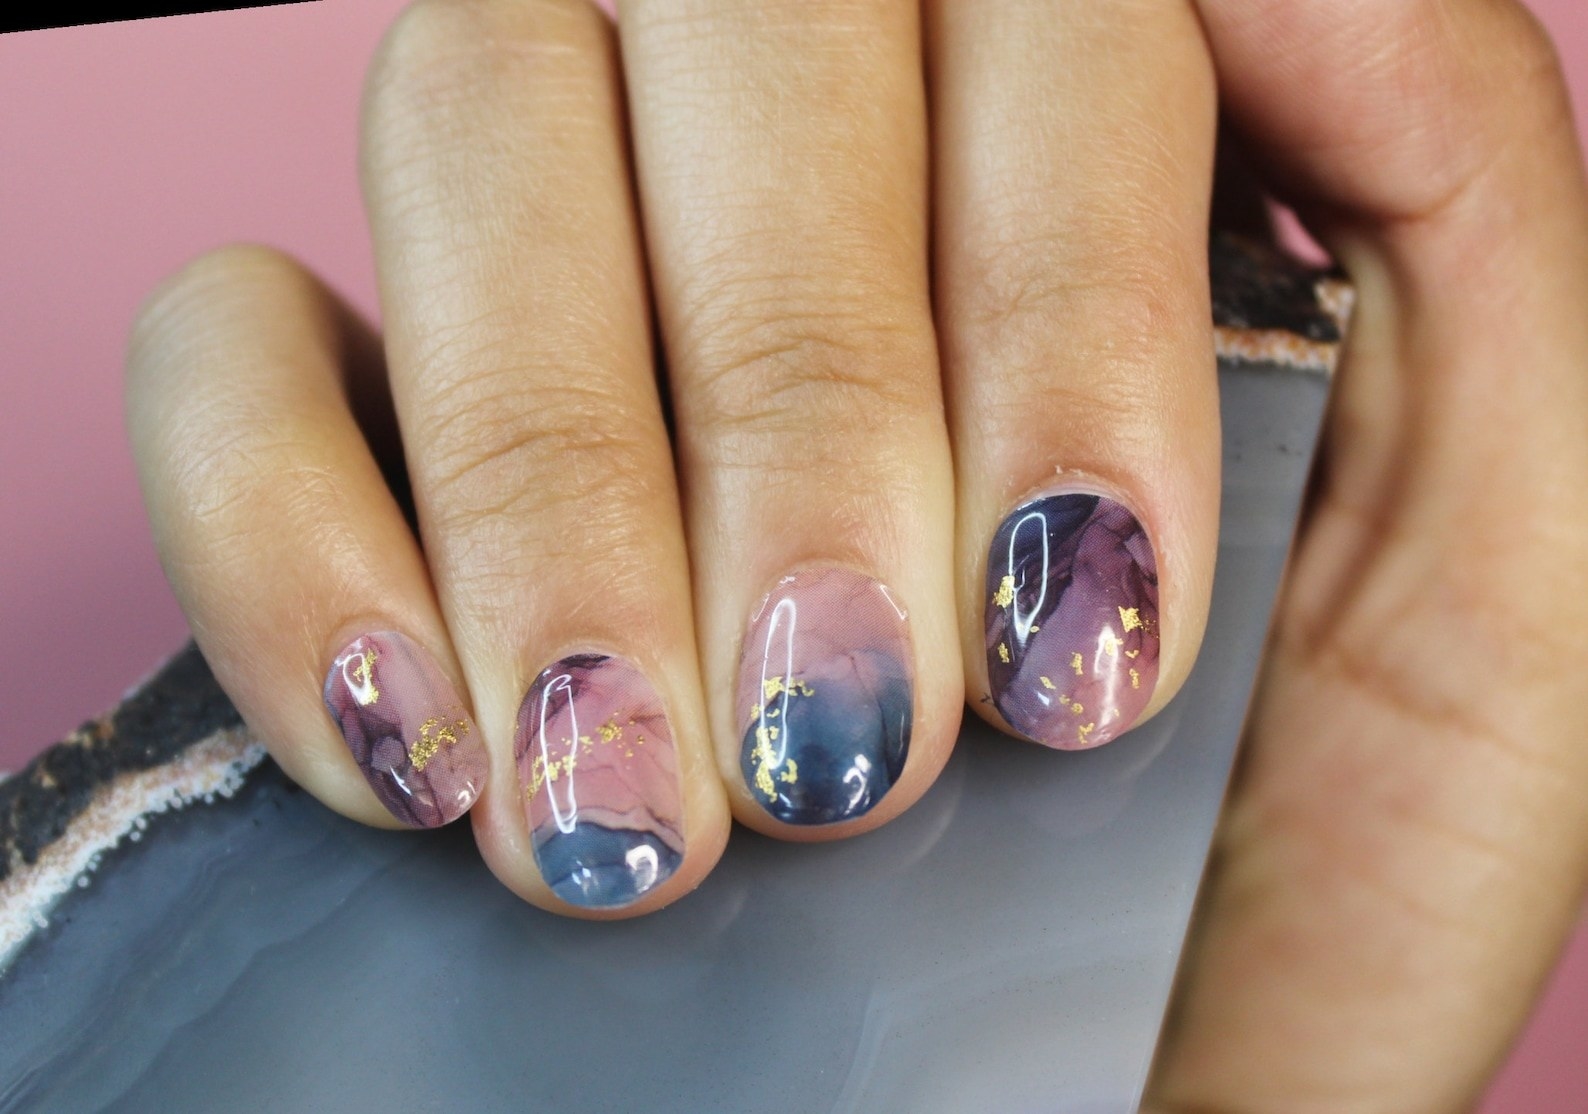 the dark blue and purple marble designed nail wraps